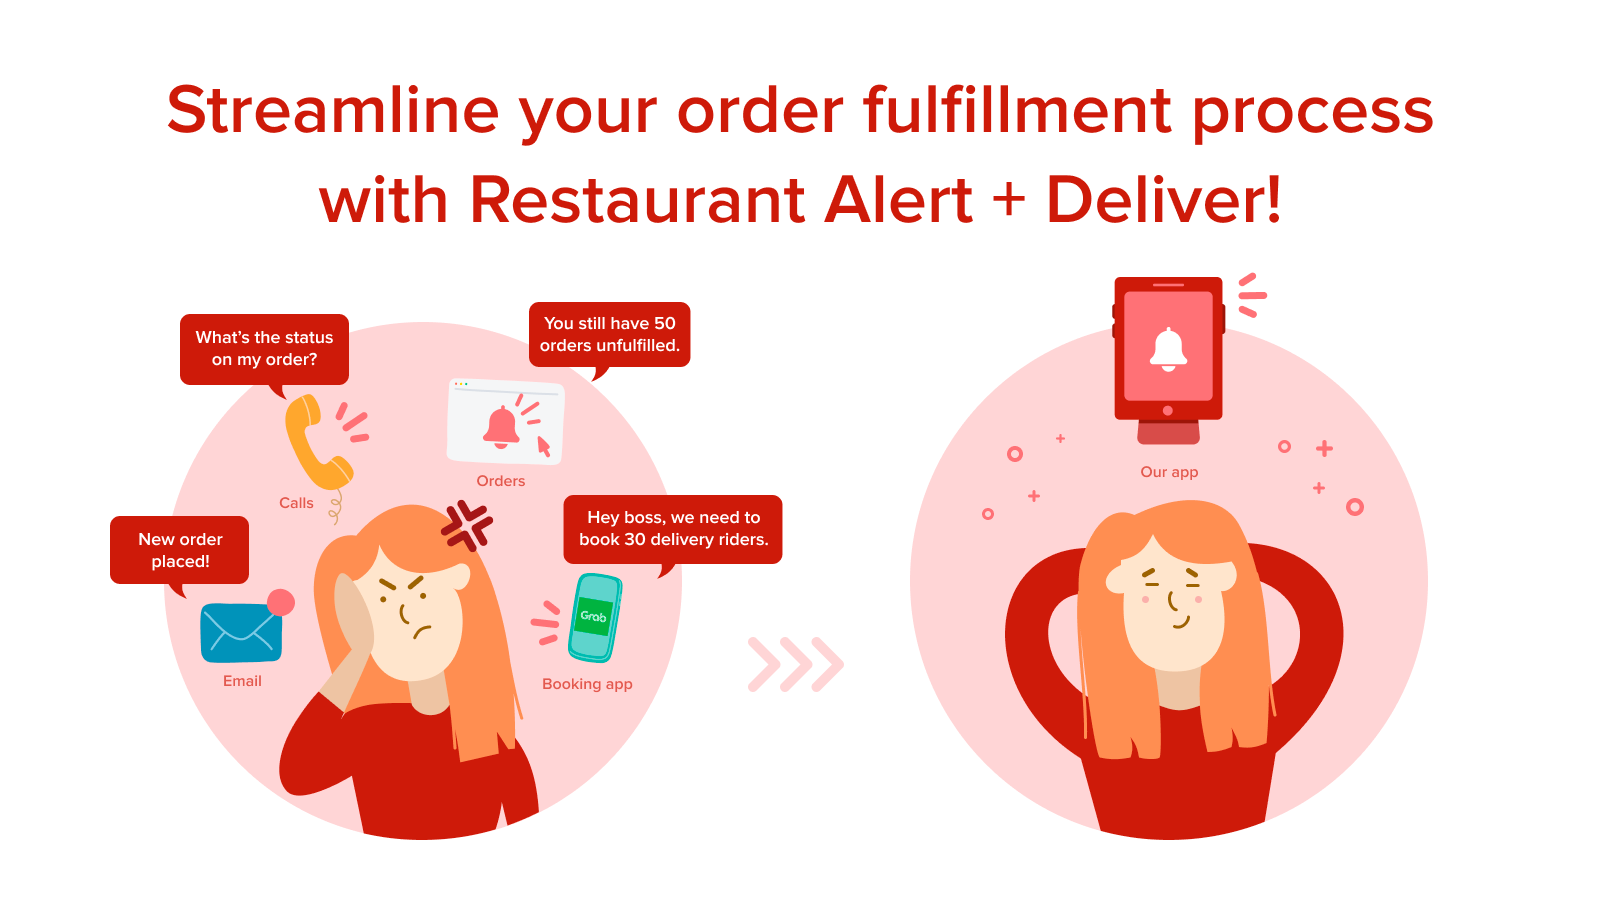 Streamline your order process with Restaurant Alerts + Delivery!